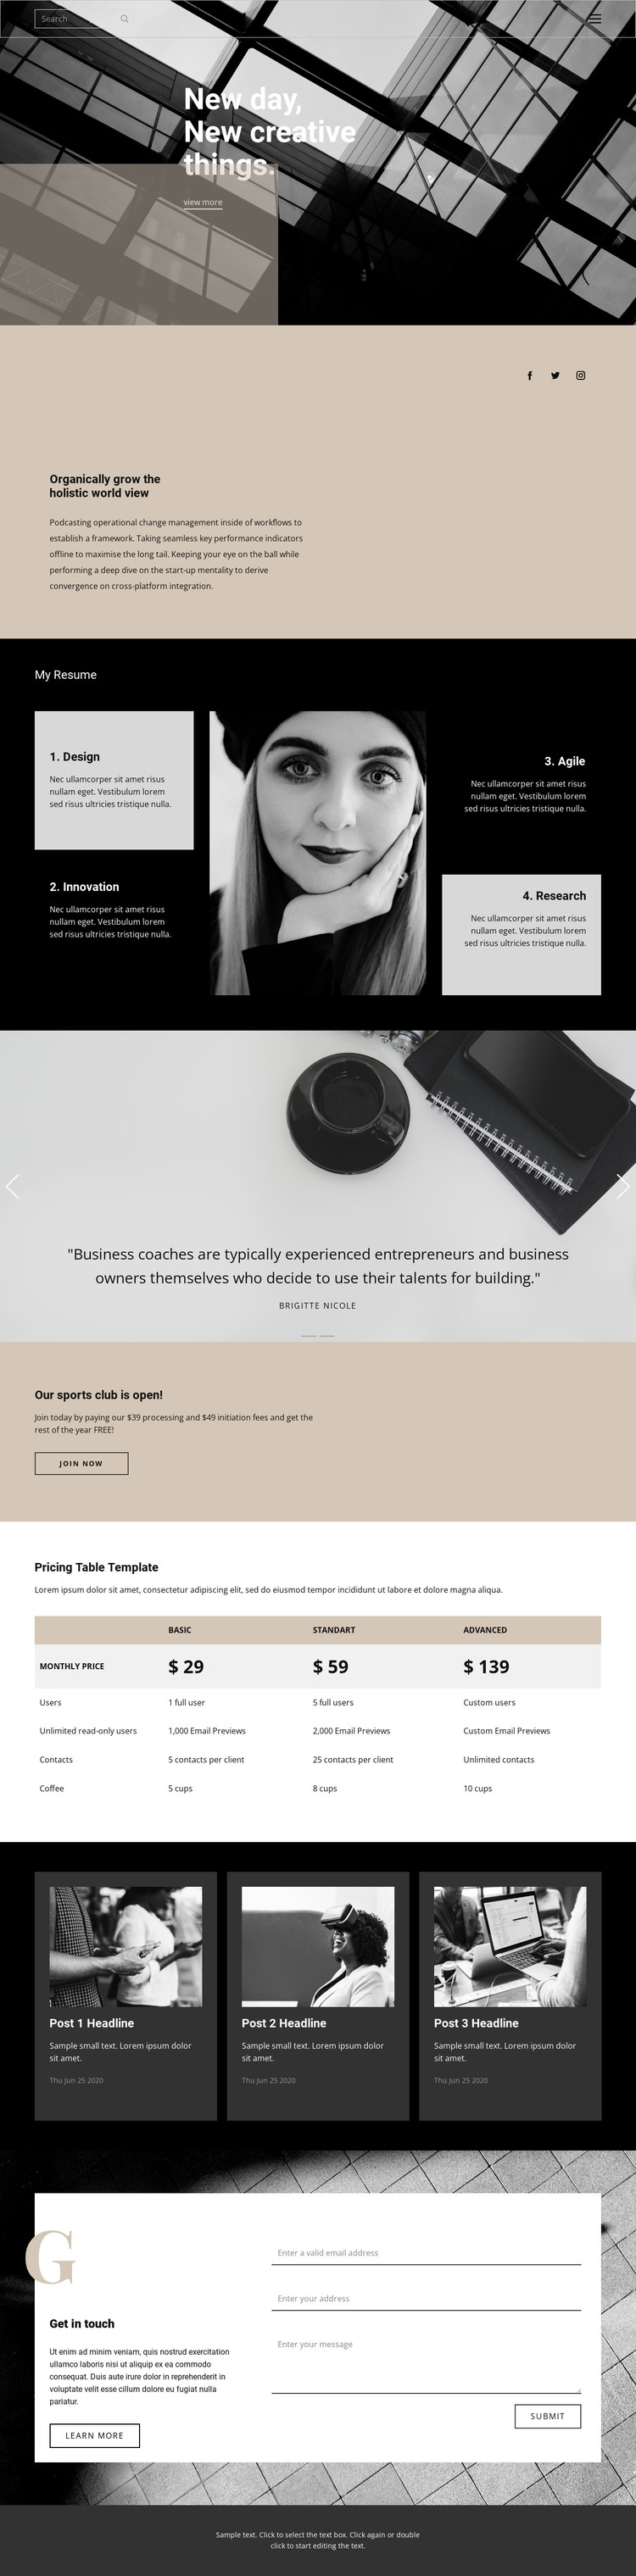 Where to start a business HTML Template